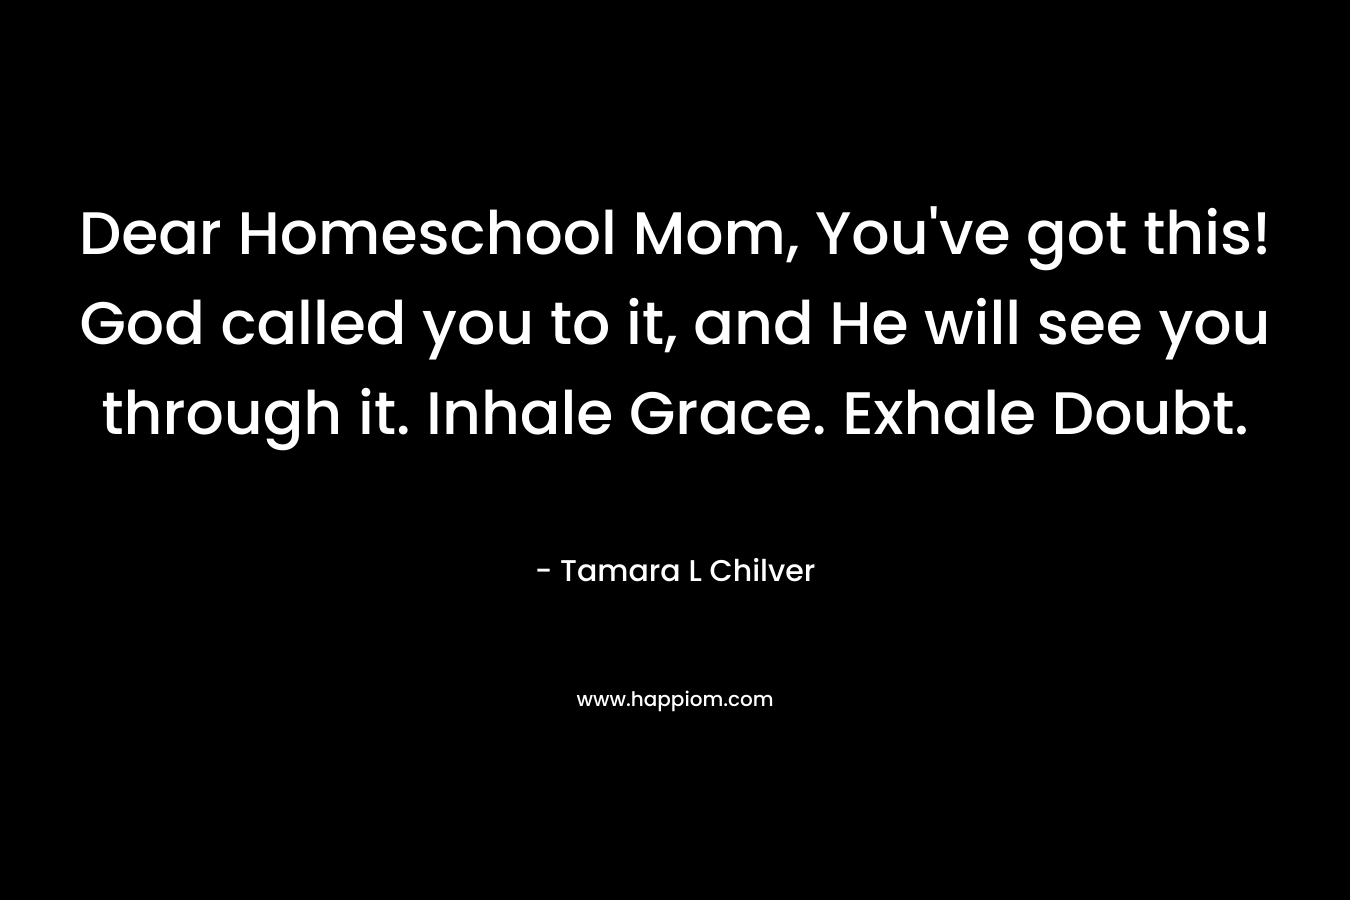 Dear Homeschool Mom, You've got this! God called you to it, and He will see you through it. Inhale Grace. Exhale Doubt.